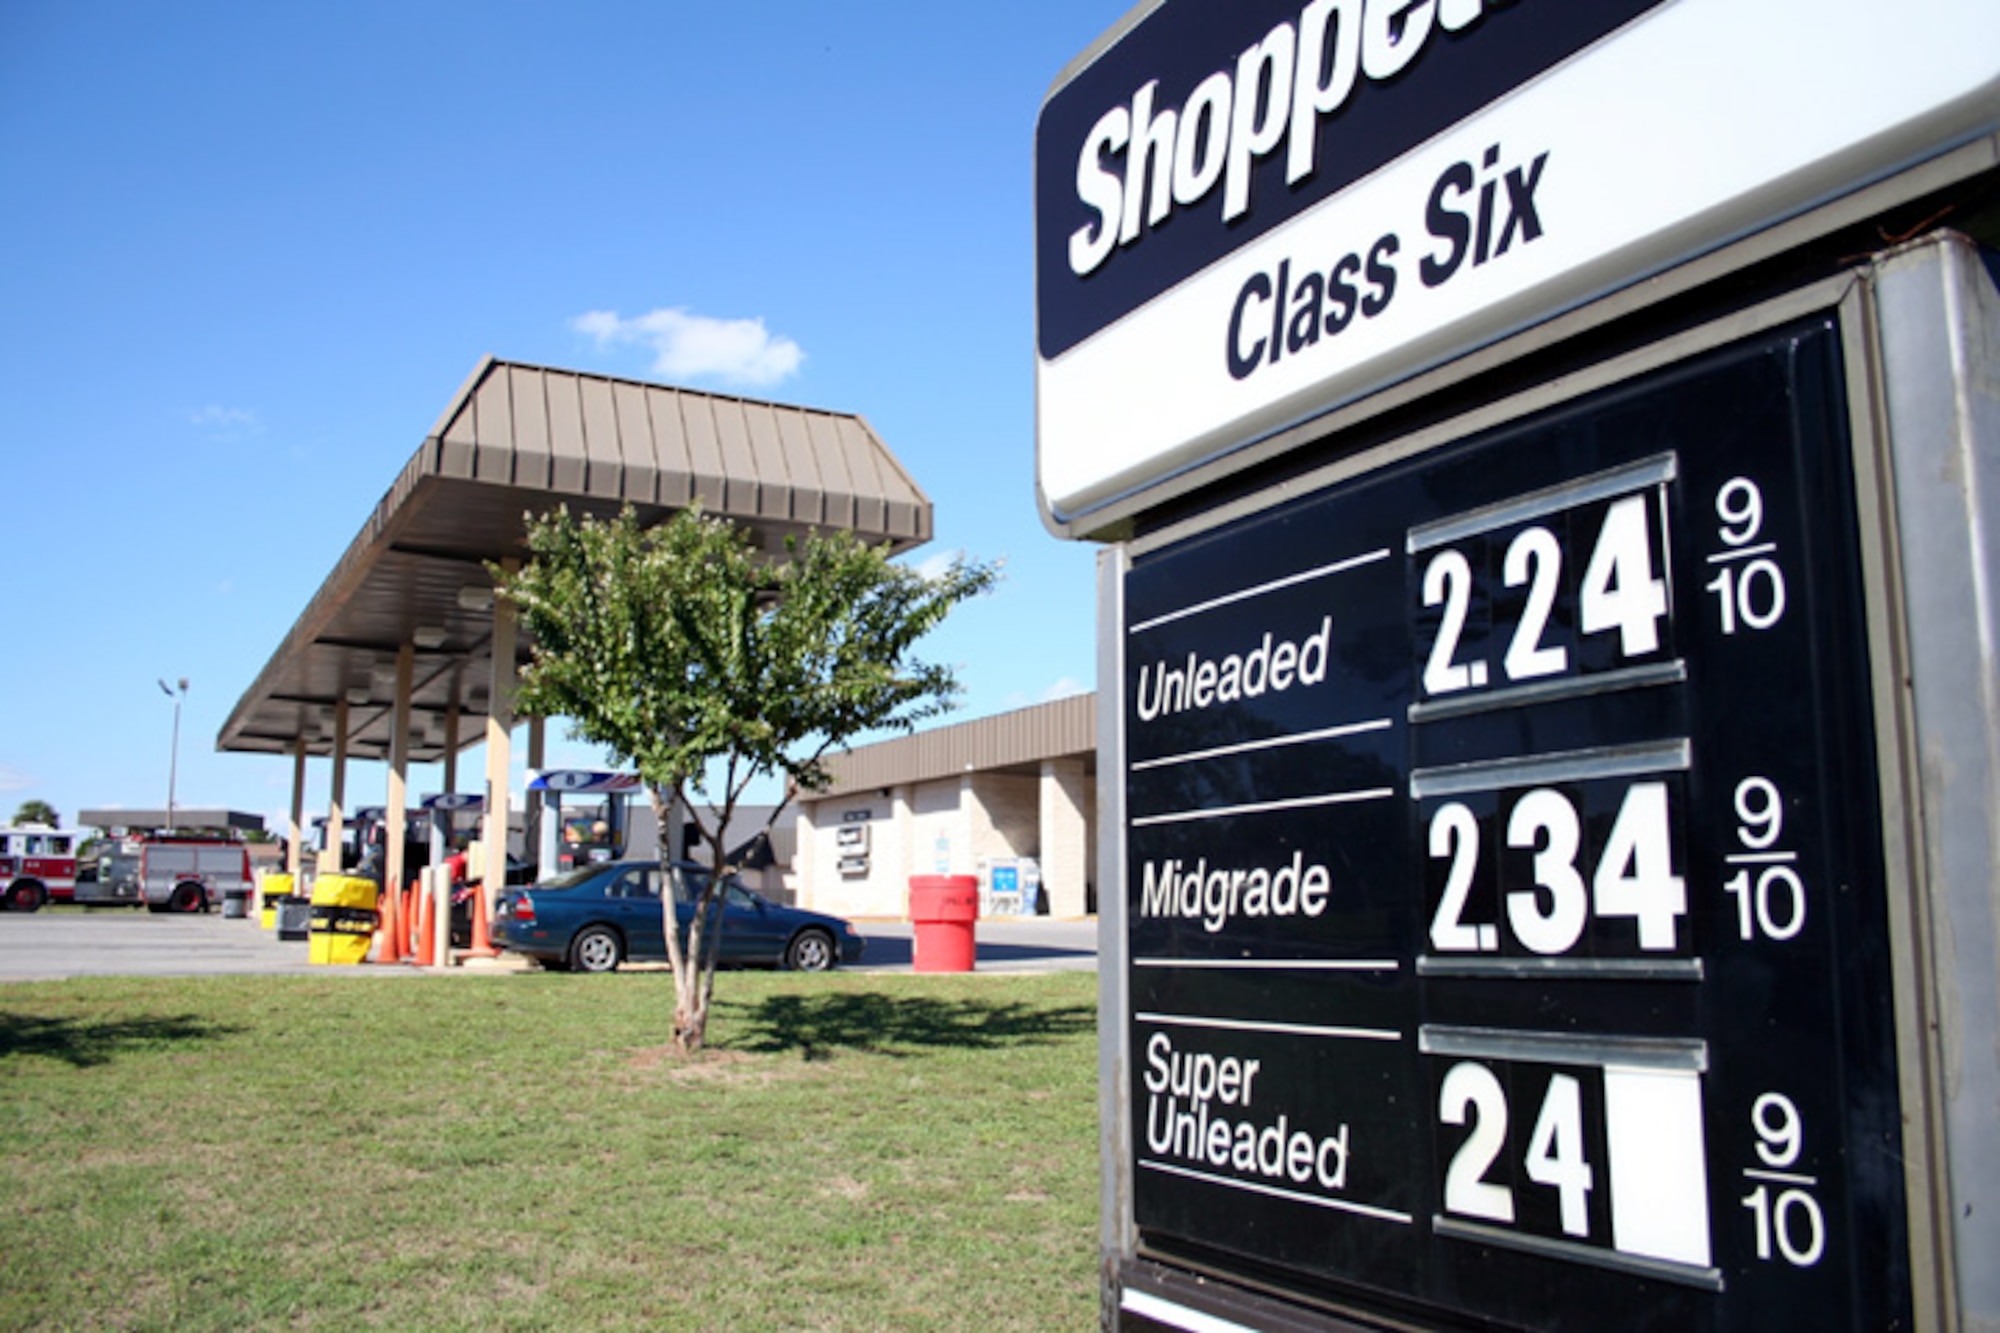 Gas prices at the Hurlburt Field Shopette have seen a dramatic drop over the past few weeks.